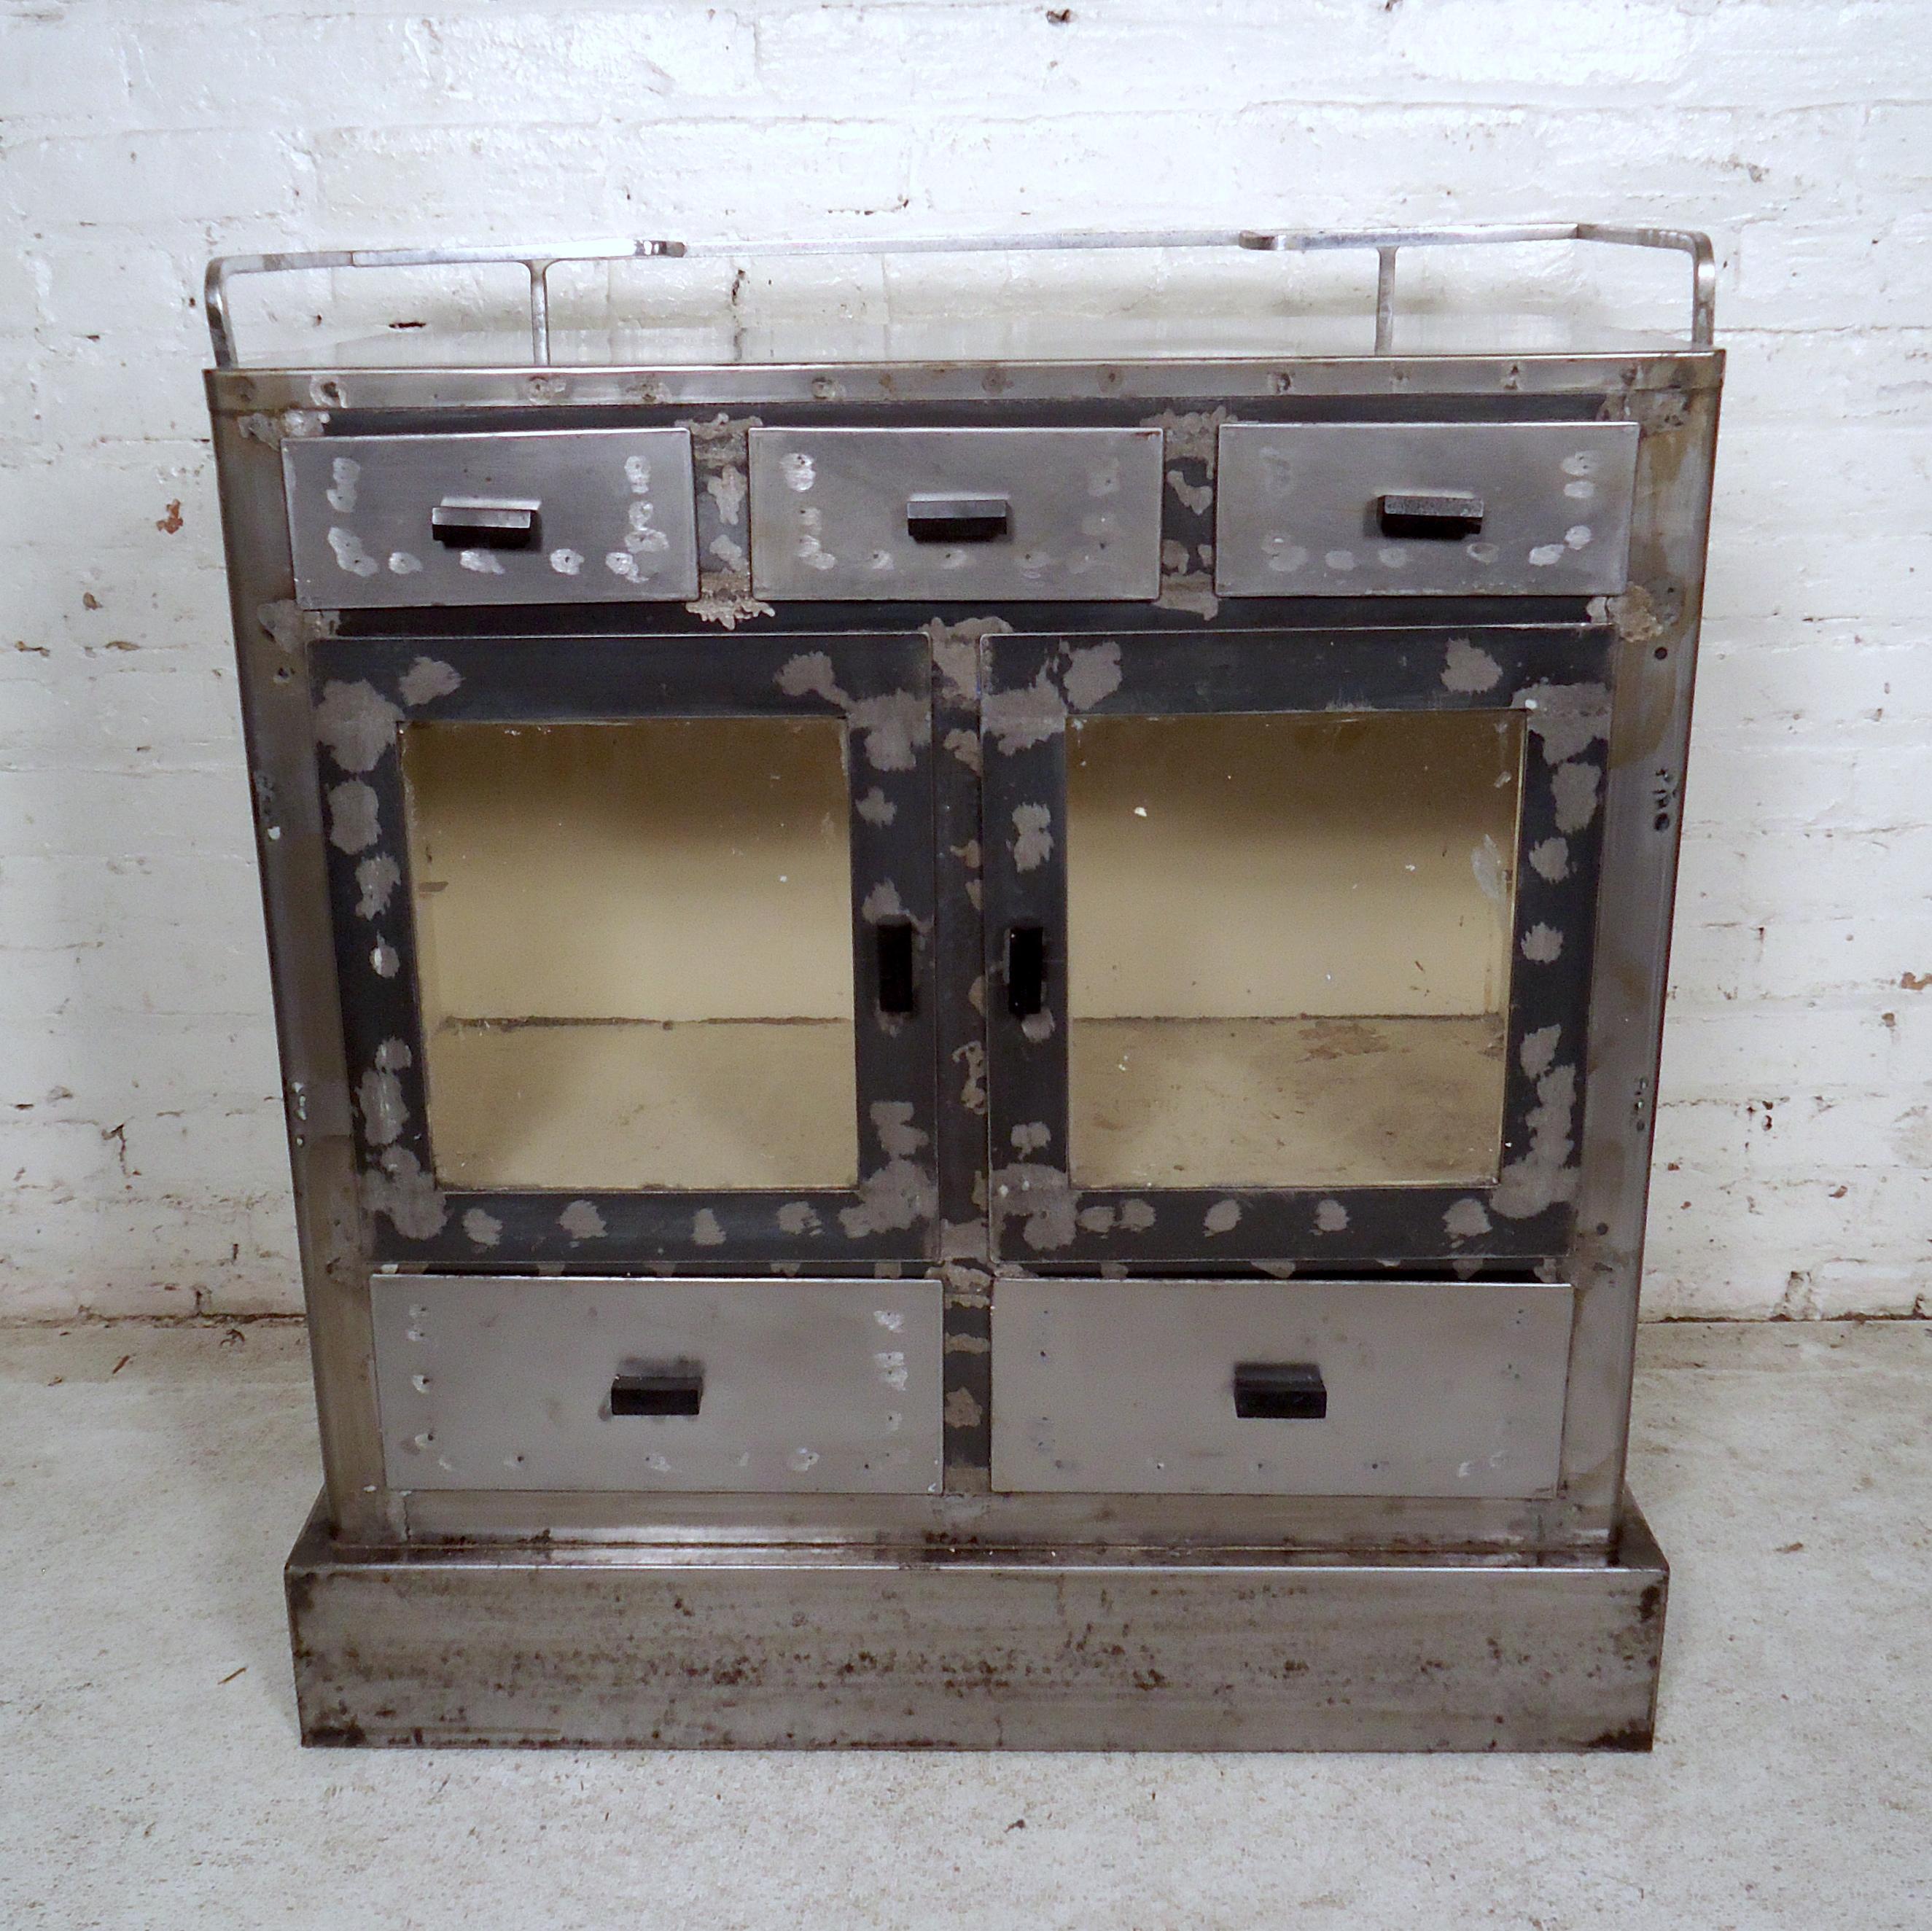 Vintage metal cabinet with ample storage, refinished in a bare metal style. Unique side cabinets and drawers, casters, top railing. Great for kitchen or bathroom use.

(Please confirm item location - NY or NJ - with dealer).